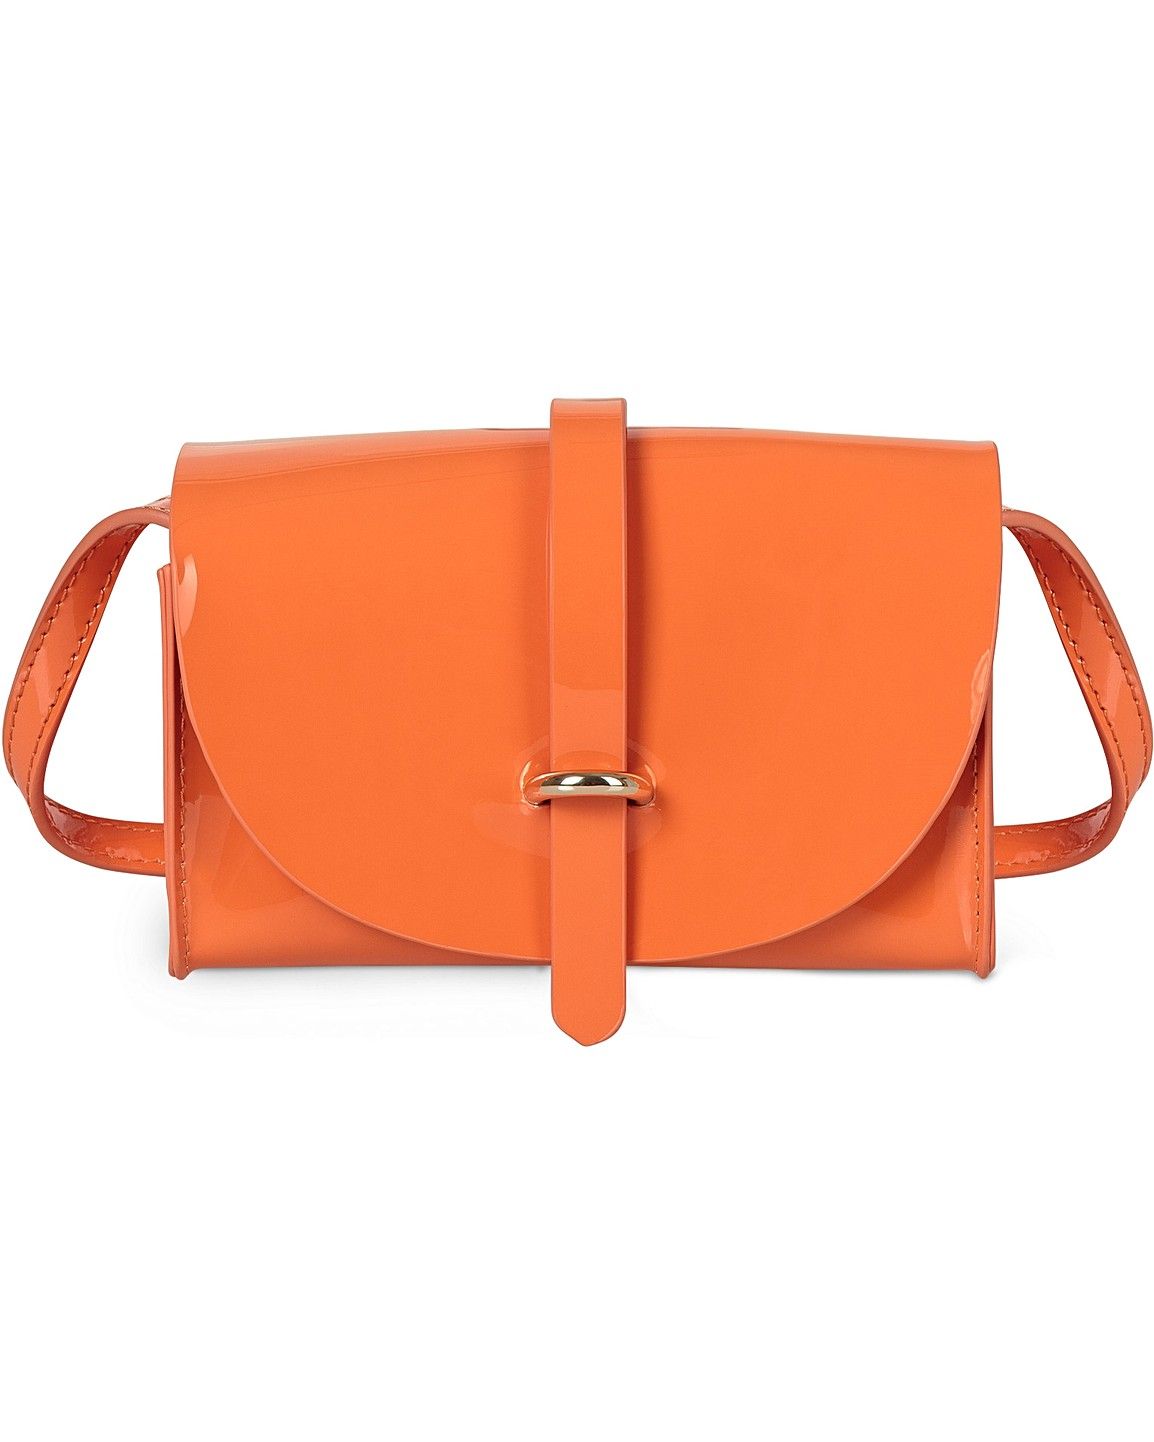 Bags | Crossbody Bags, Totes & Clutches | Oliver Bonas